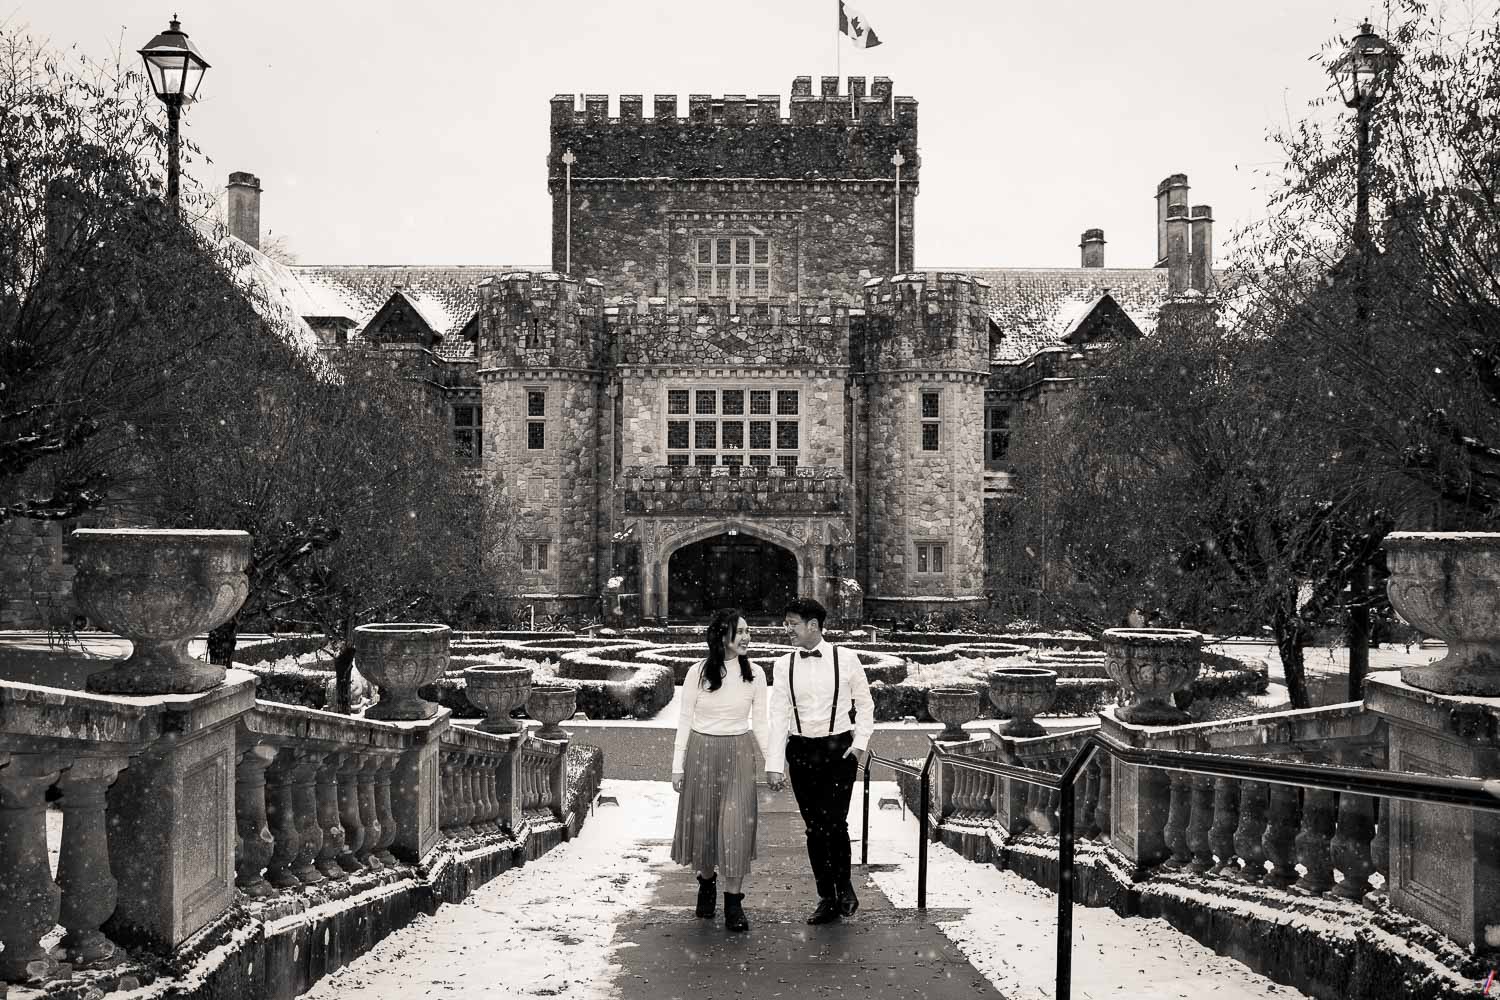 Professional Photographers at the Hatley Castle snow day. 